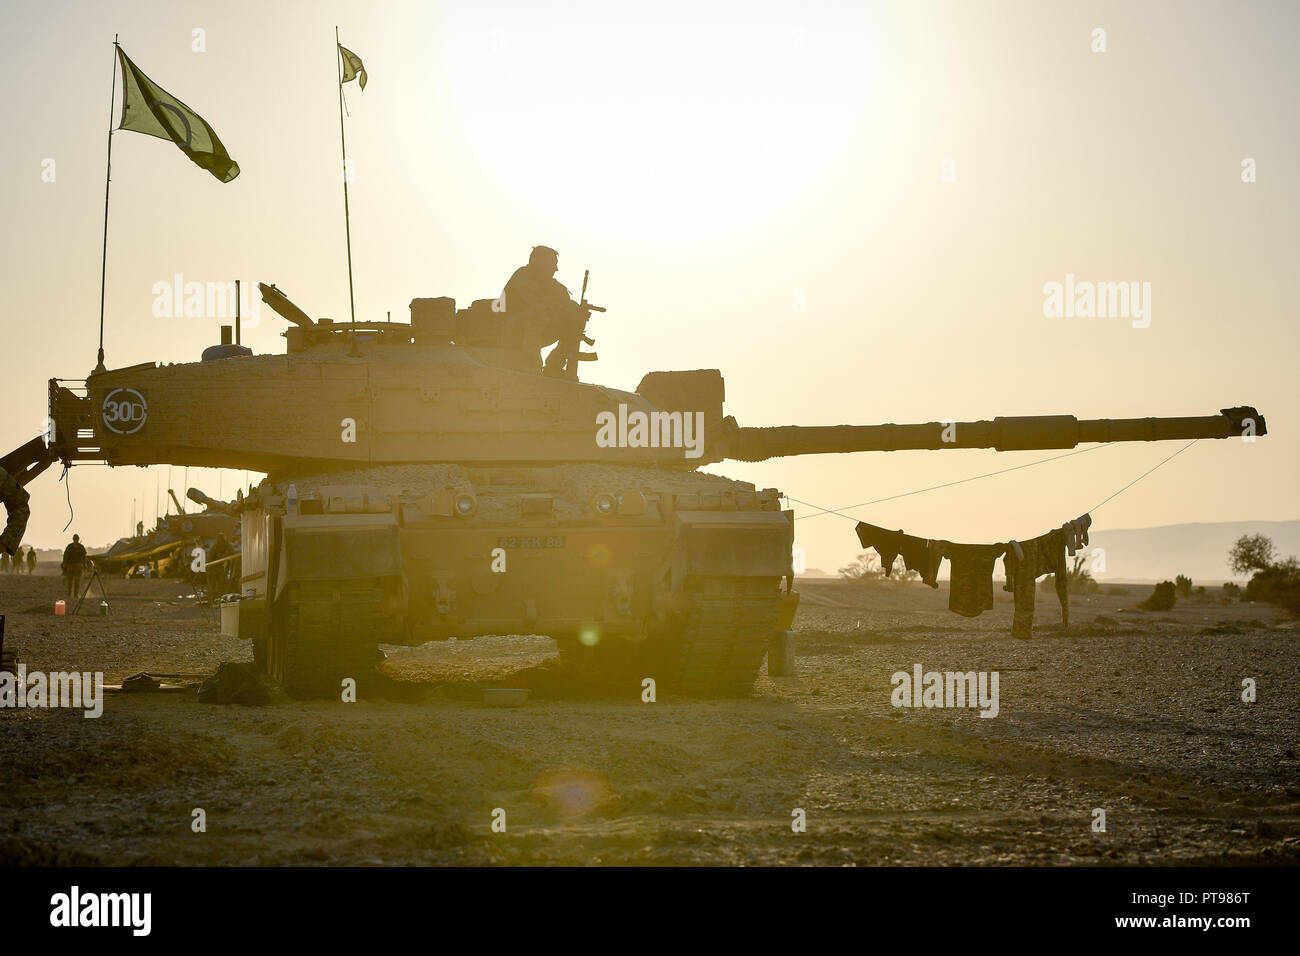 The sun sets over a Challenger II Main Battle Tank in the Oman desert, where UK forces are taking part in a month-long Exercise, Saif Sareea 3. Stock Photo